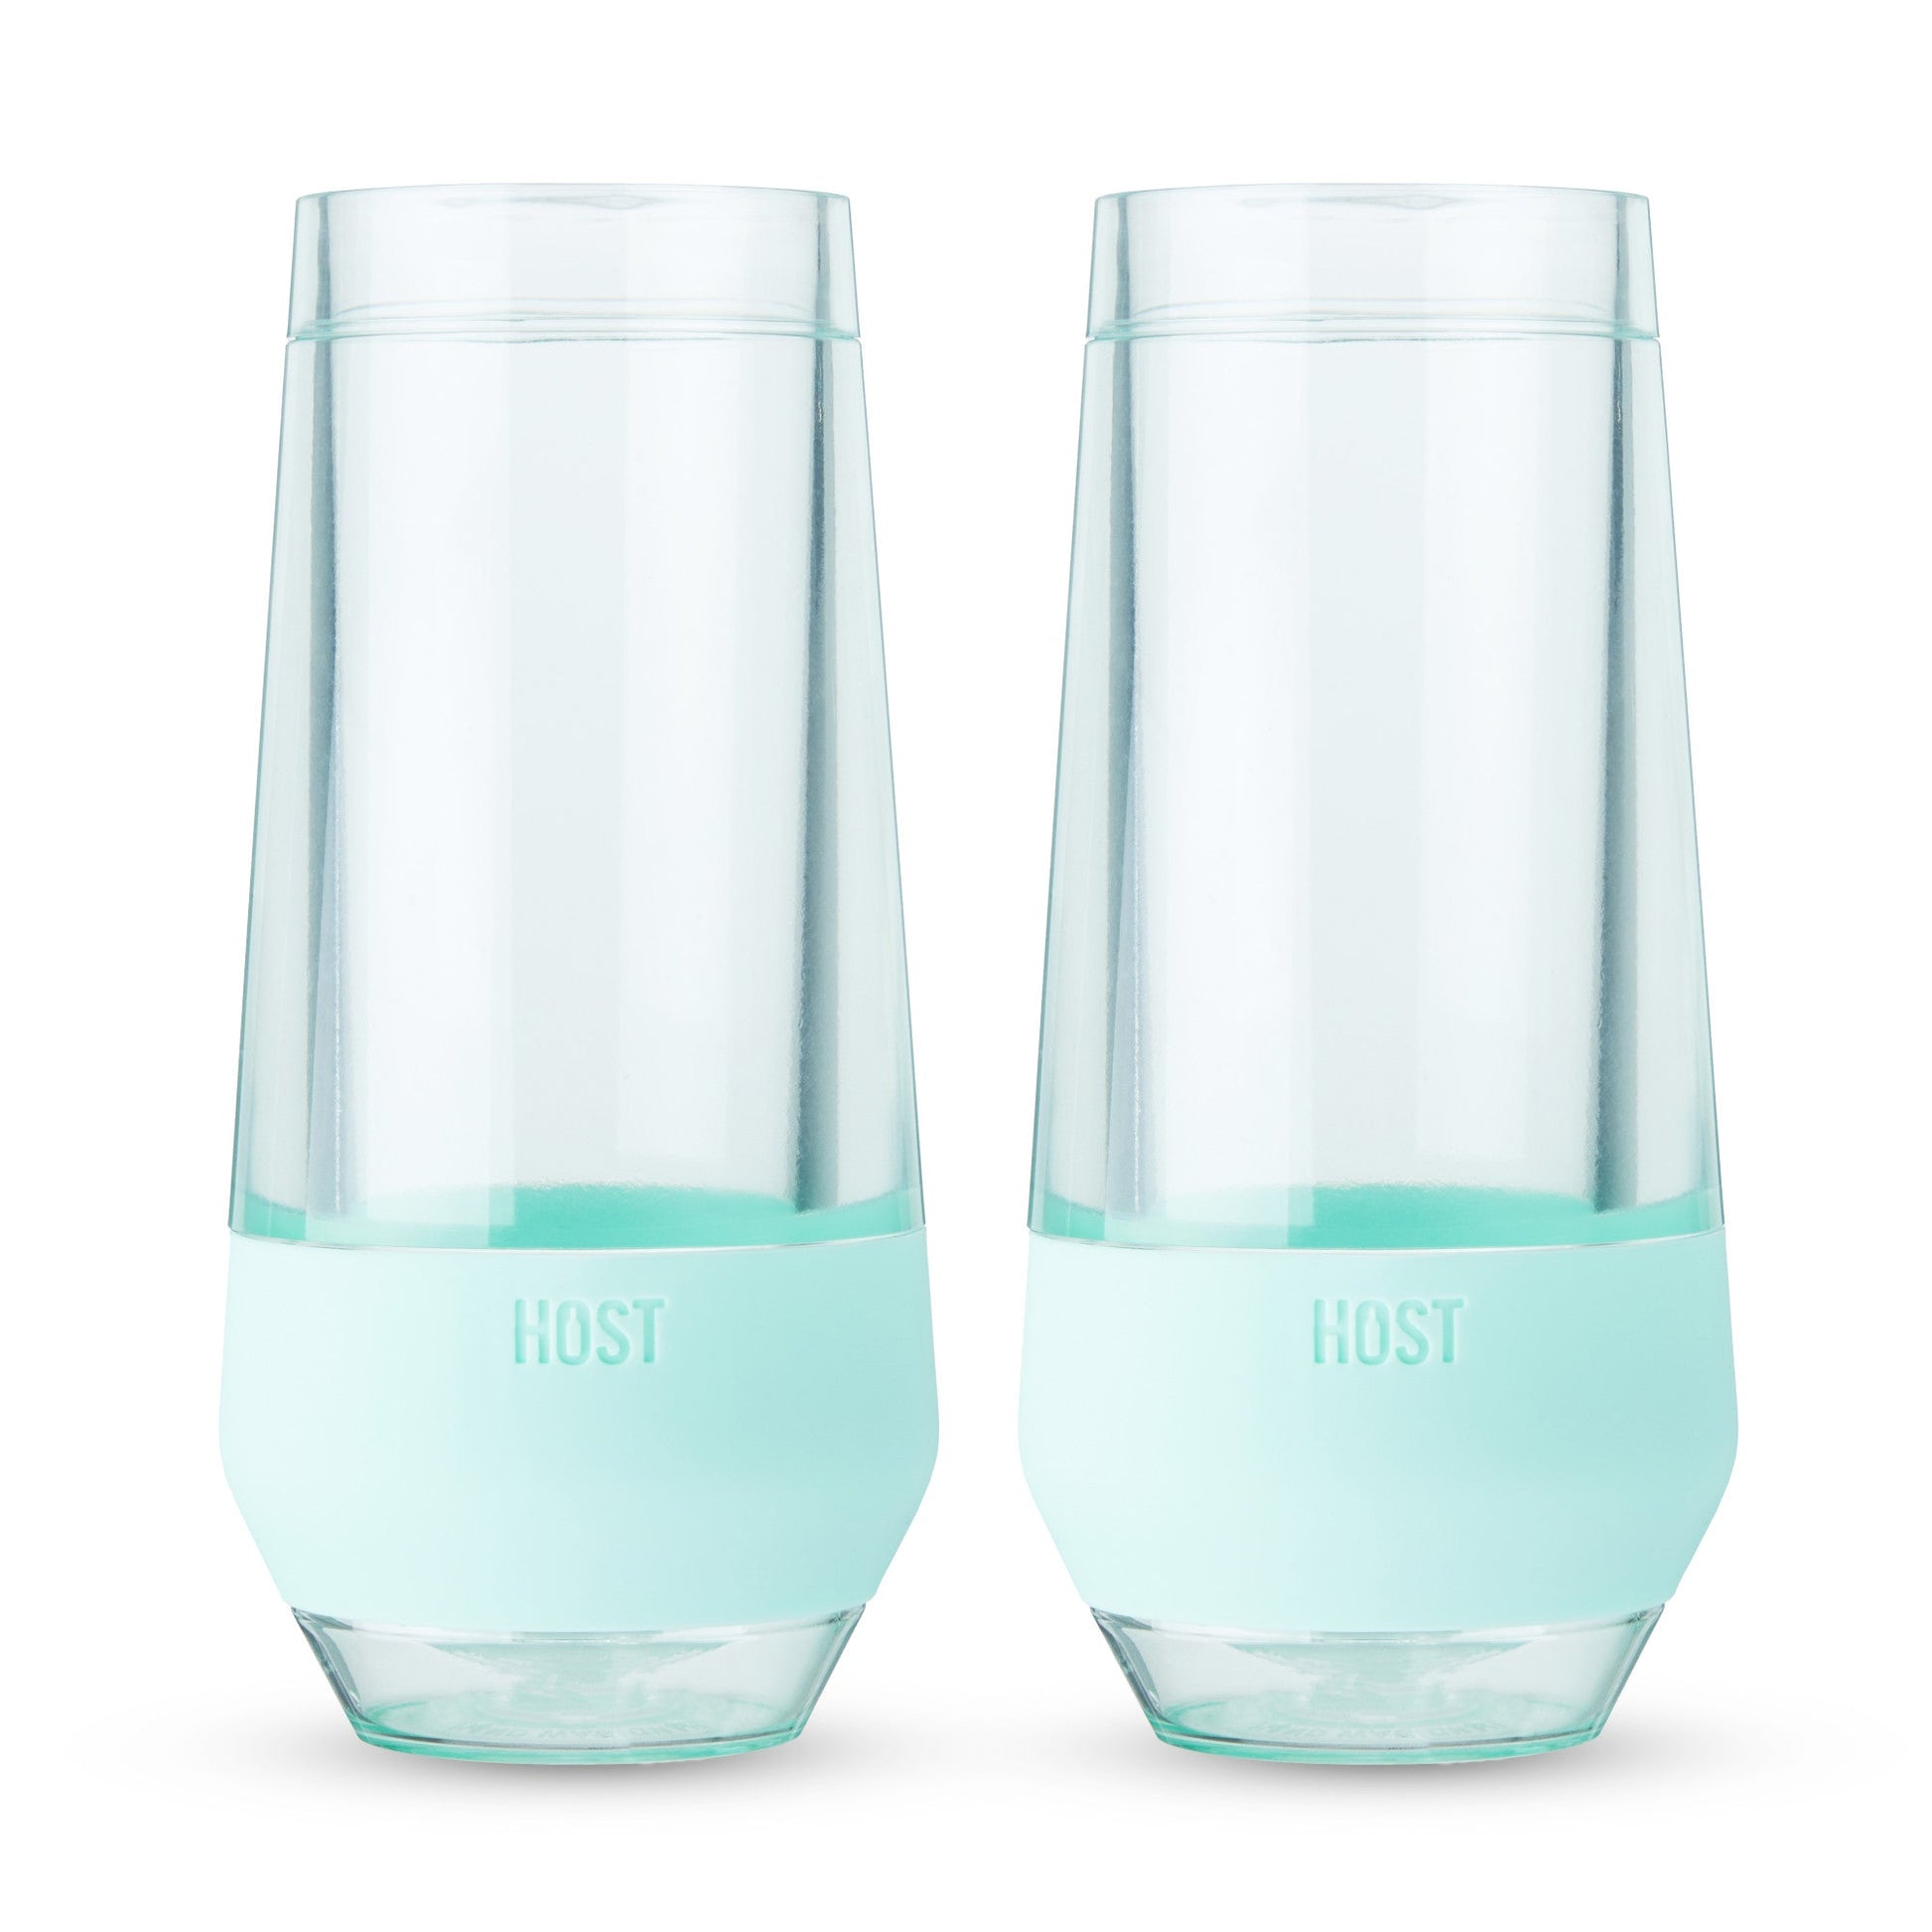 Champagne FREEZE™ in Seafoam Tint (set of 2) - Royalties